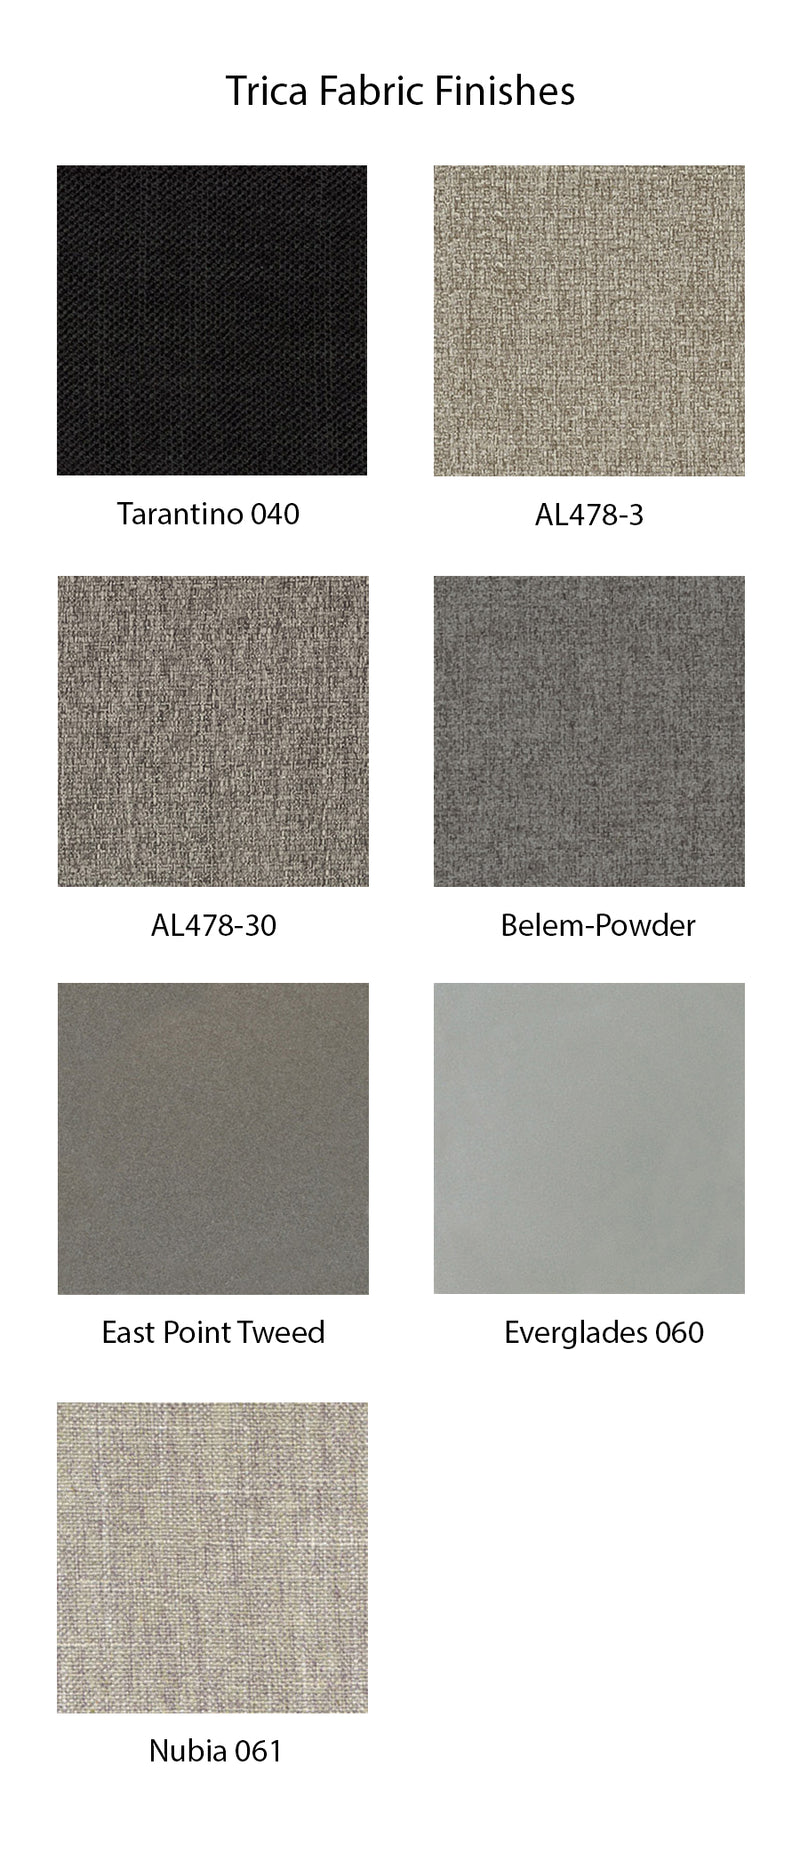 products/fabric-finishes-trica_38e83c23-4a02-406a-bd1c-c8a6955d84dd.jpg